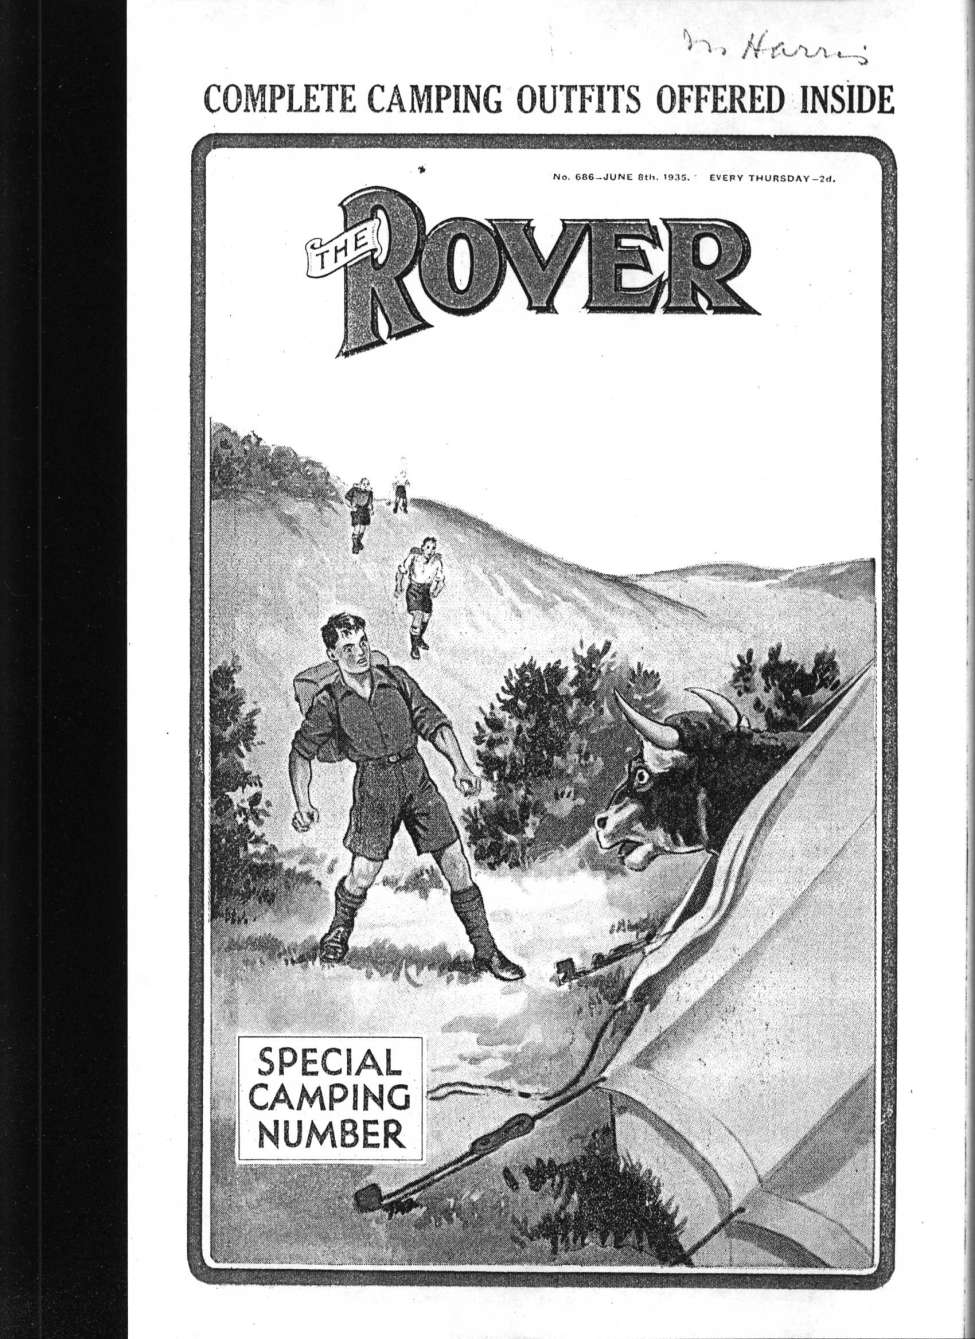 Book Cover For The Rover 686